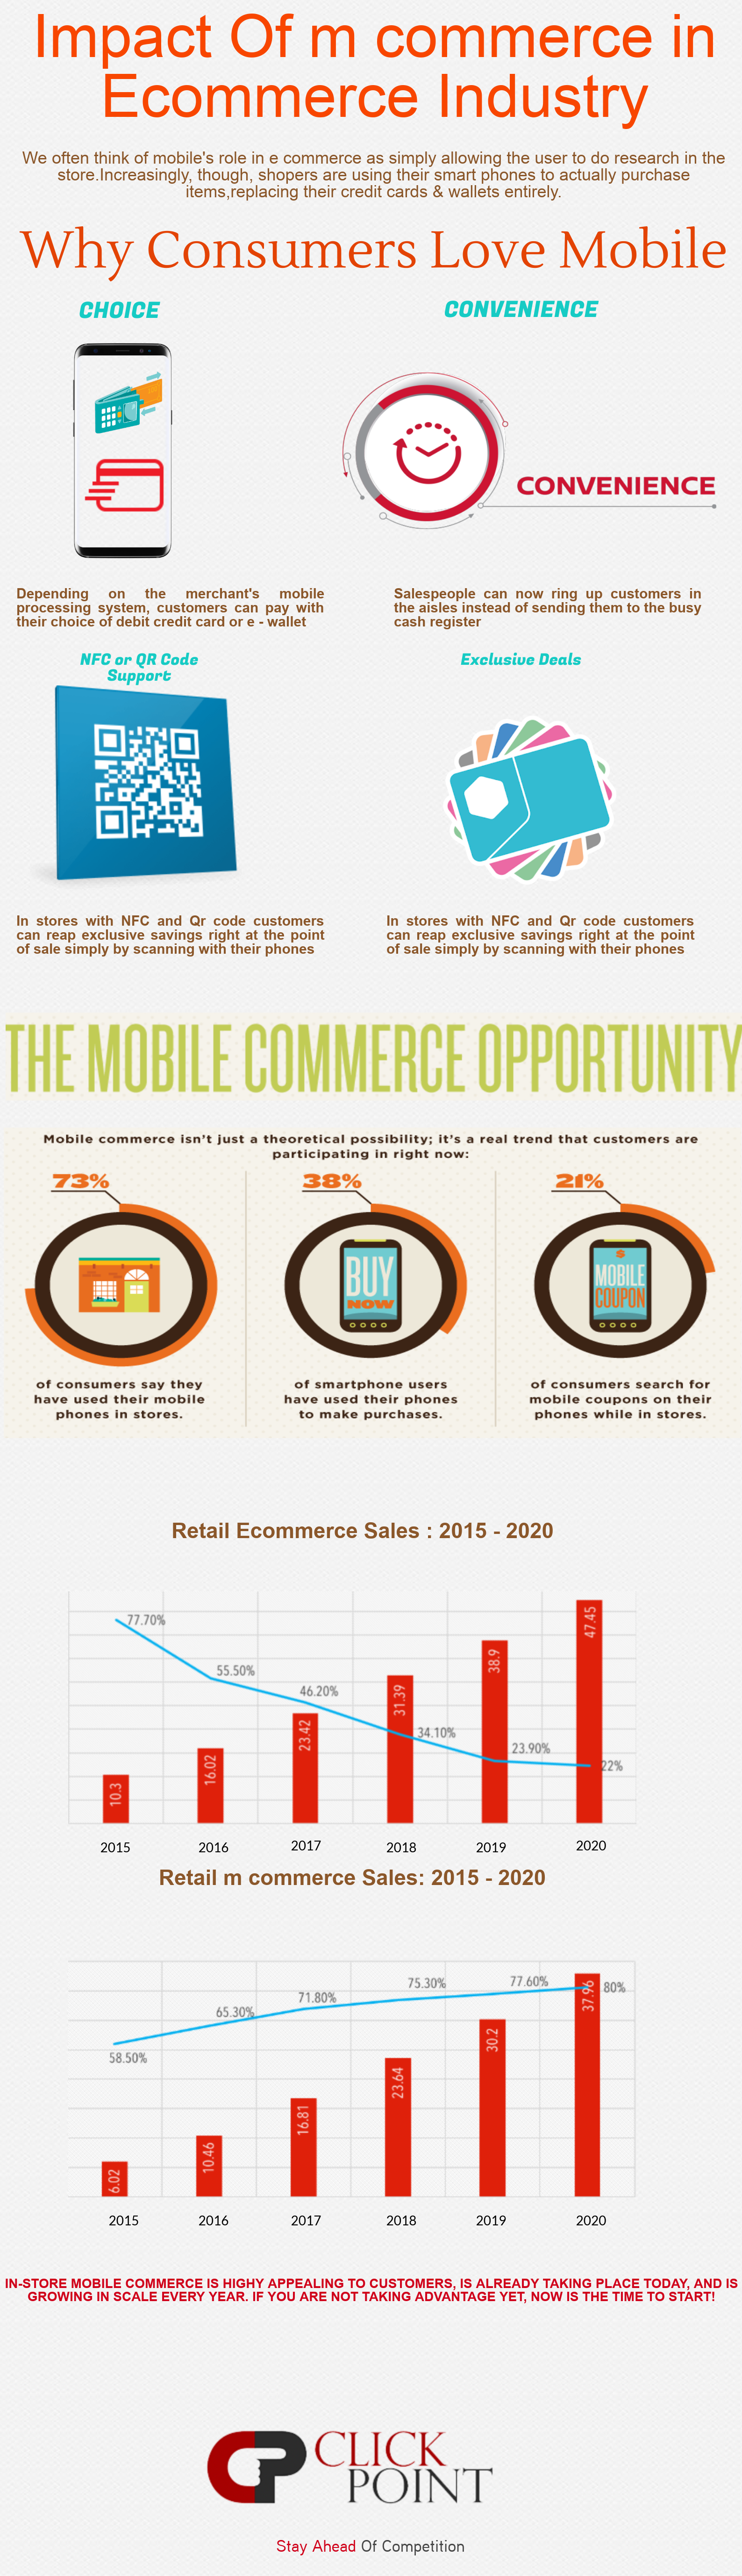 importance of m-commerce